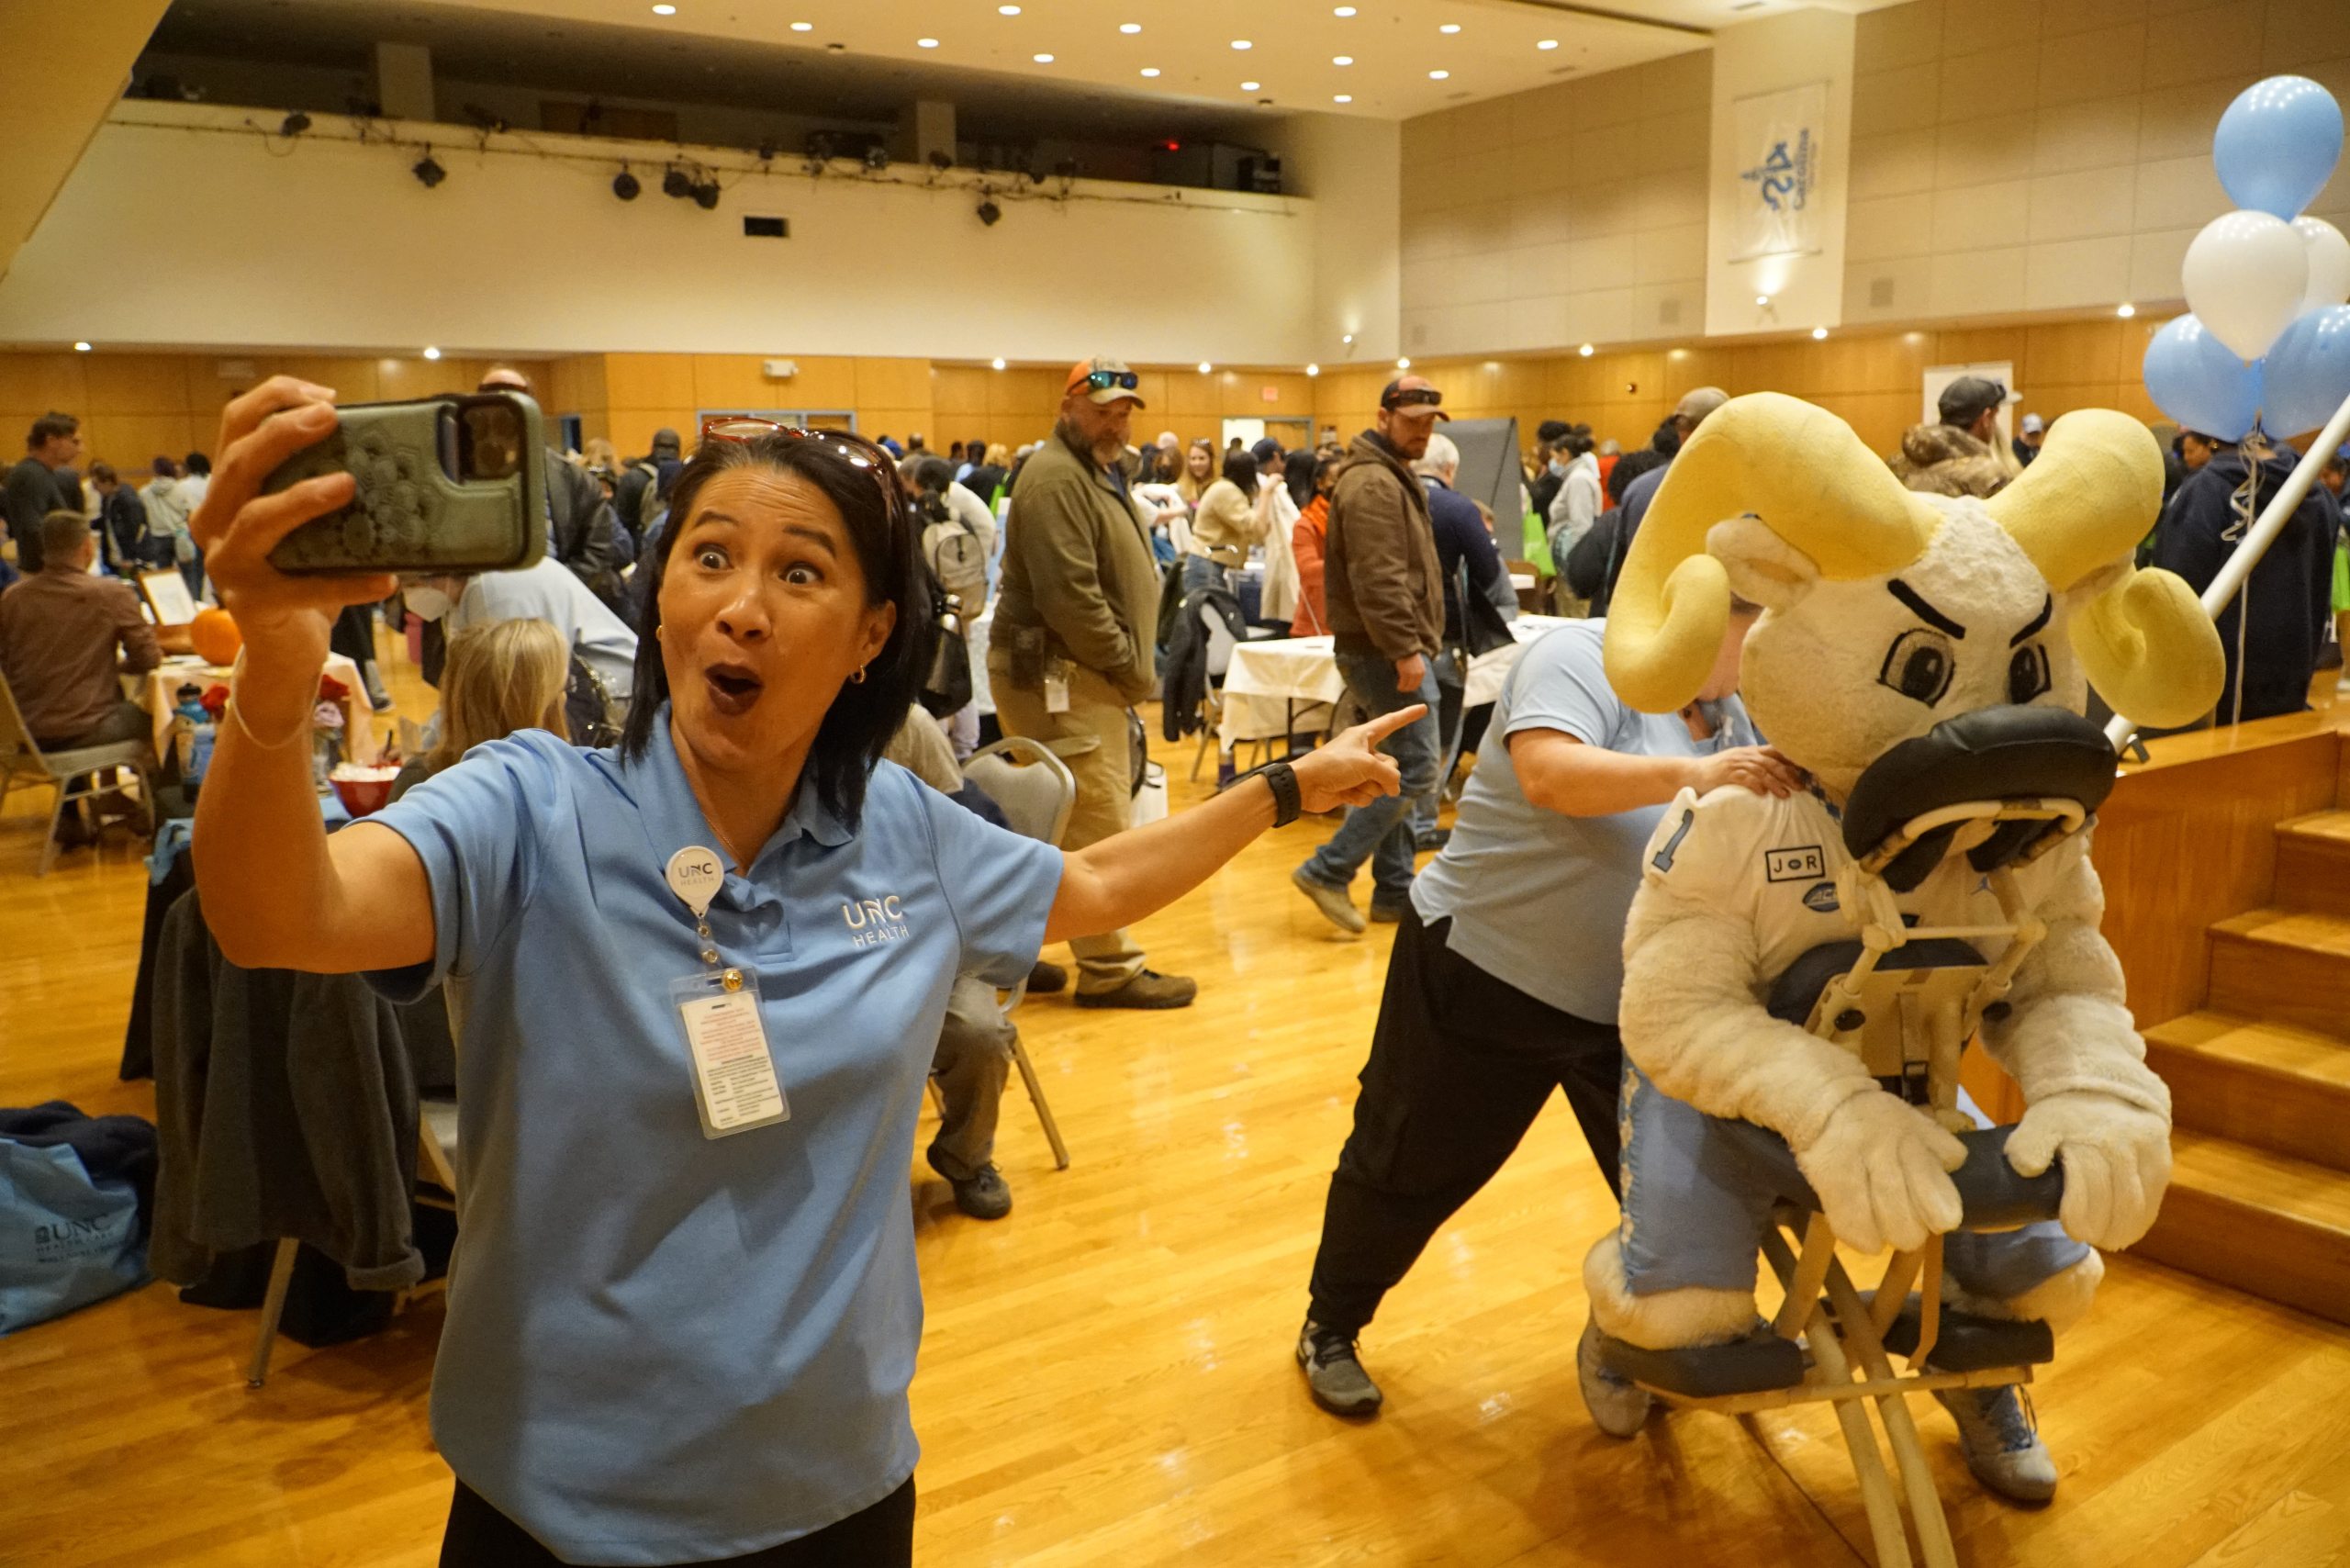 Lori Black, massage therapist with UNC Wellness, works on Rameses, while her UNC Wellness colleague, Jamie McGee snaps a selfie.